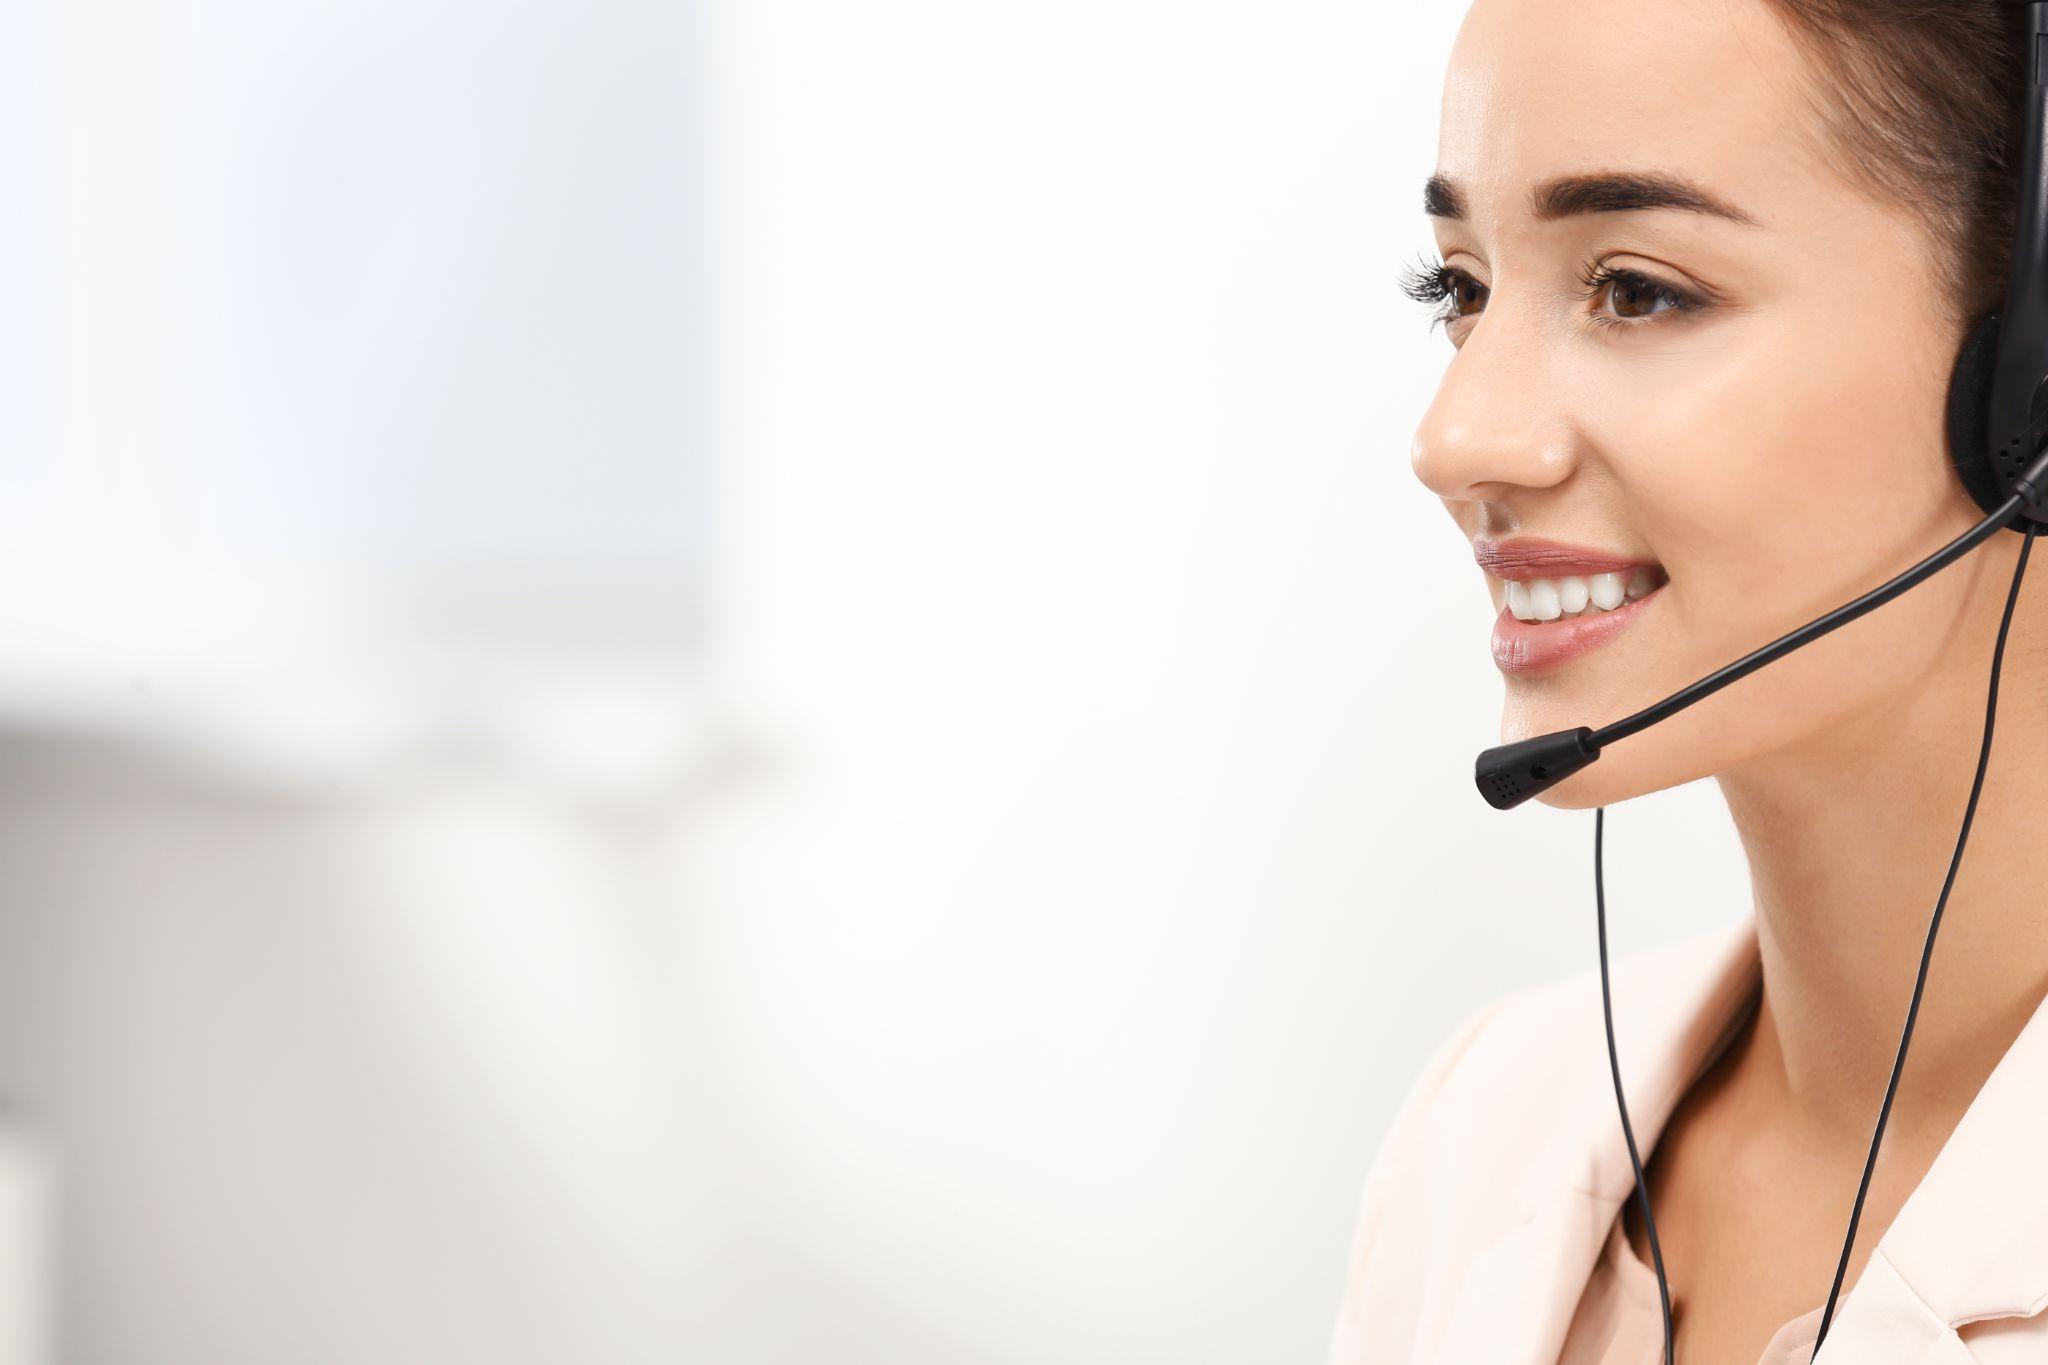 Call center agent for roofing answering service company